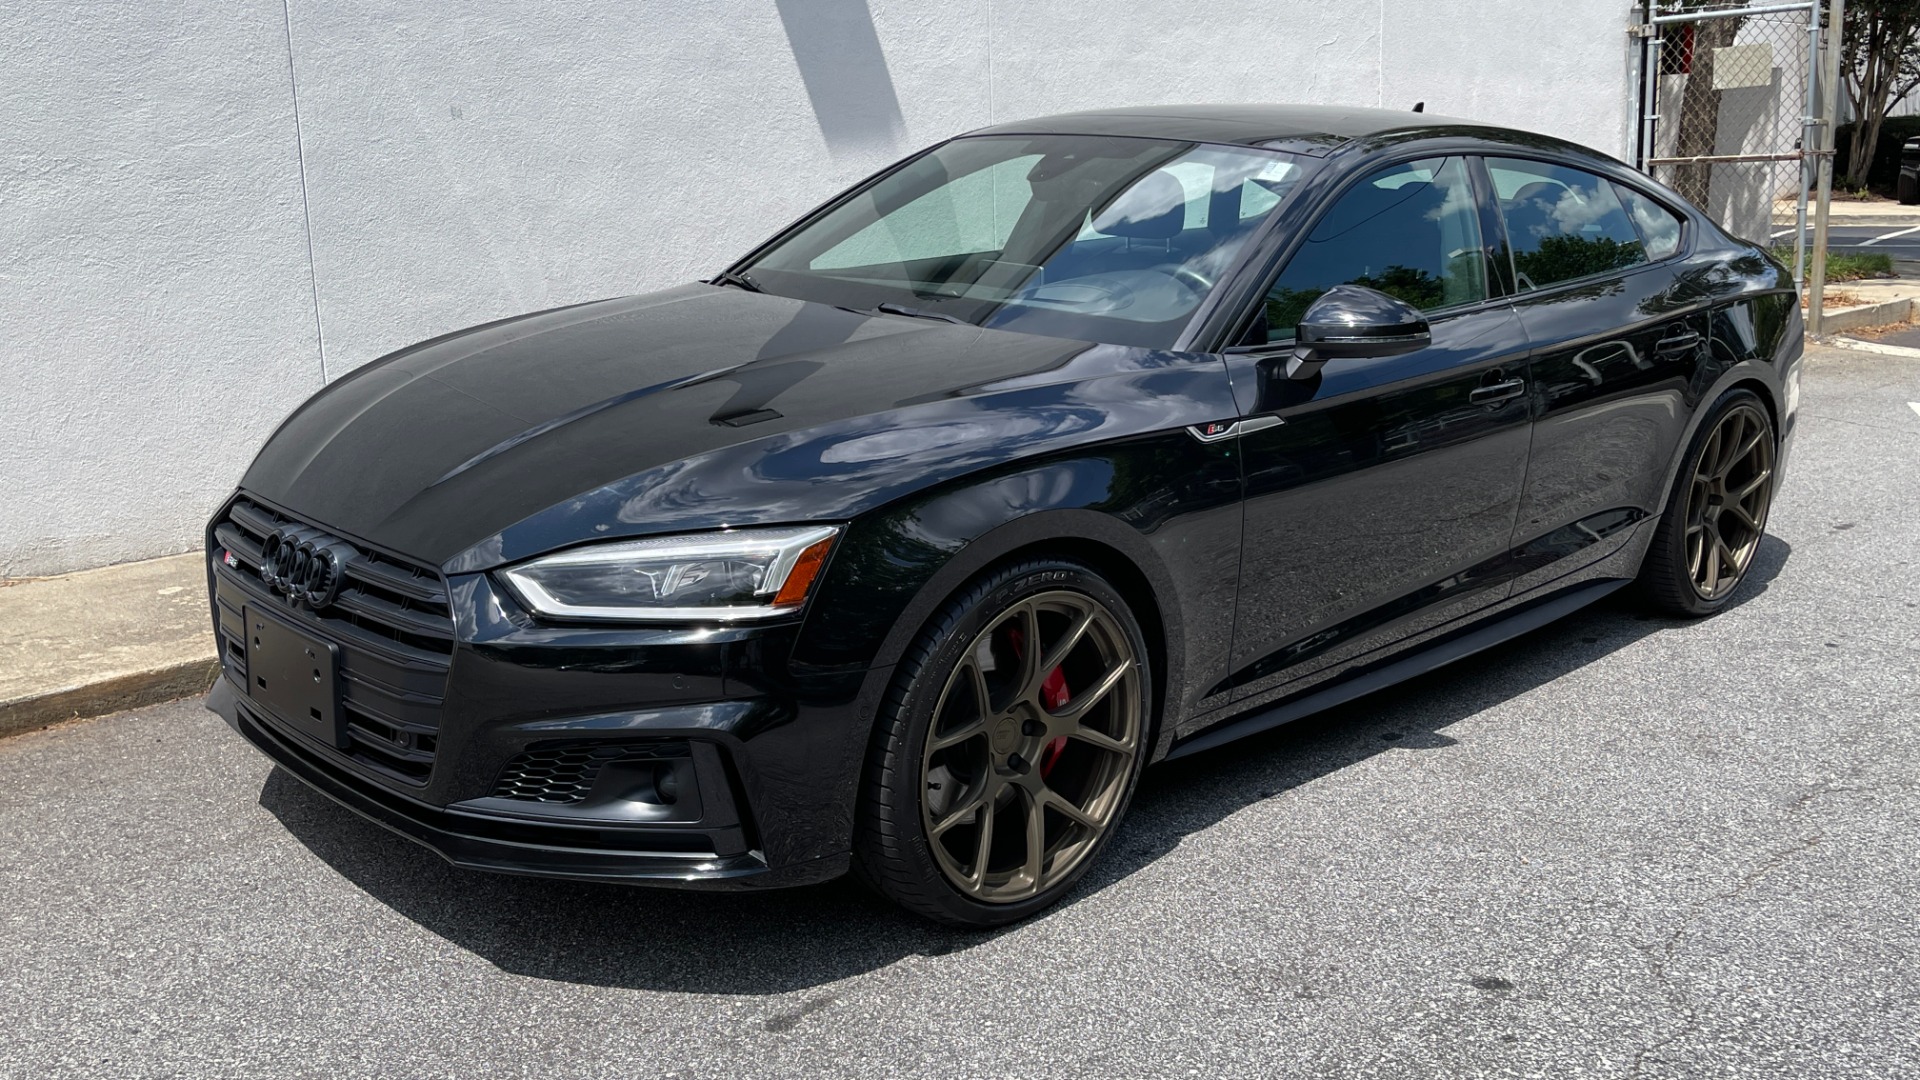 Used 2019 Audi S5 Sportback Prestige / BC FORGED WHEELS / APR INTAKE / APR EXHAUST / CARBON FIBER for sale $53,995 at Formula Imports in Charlotte NC 28227 8